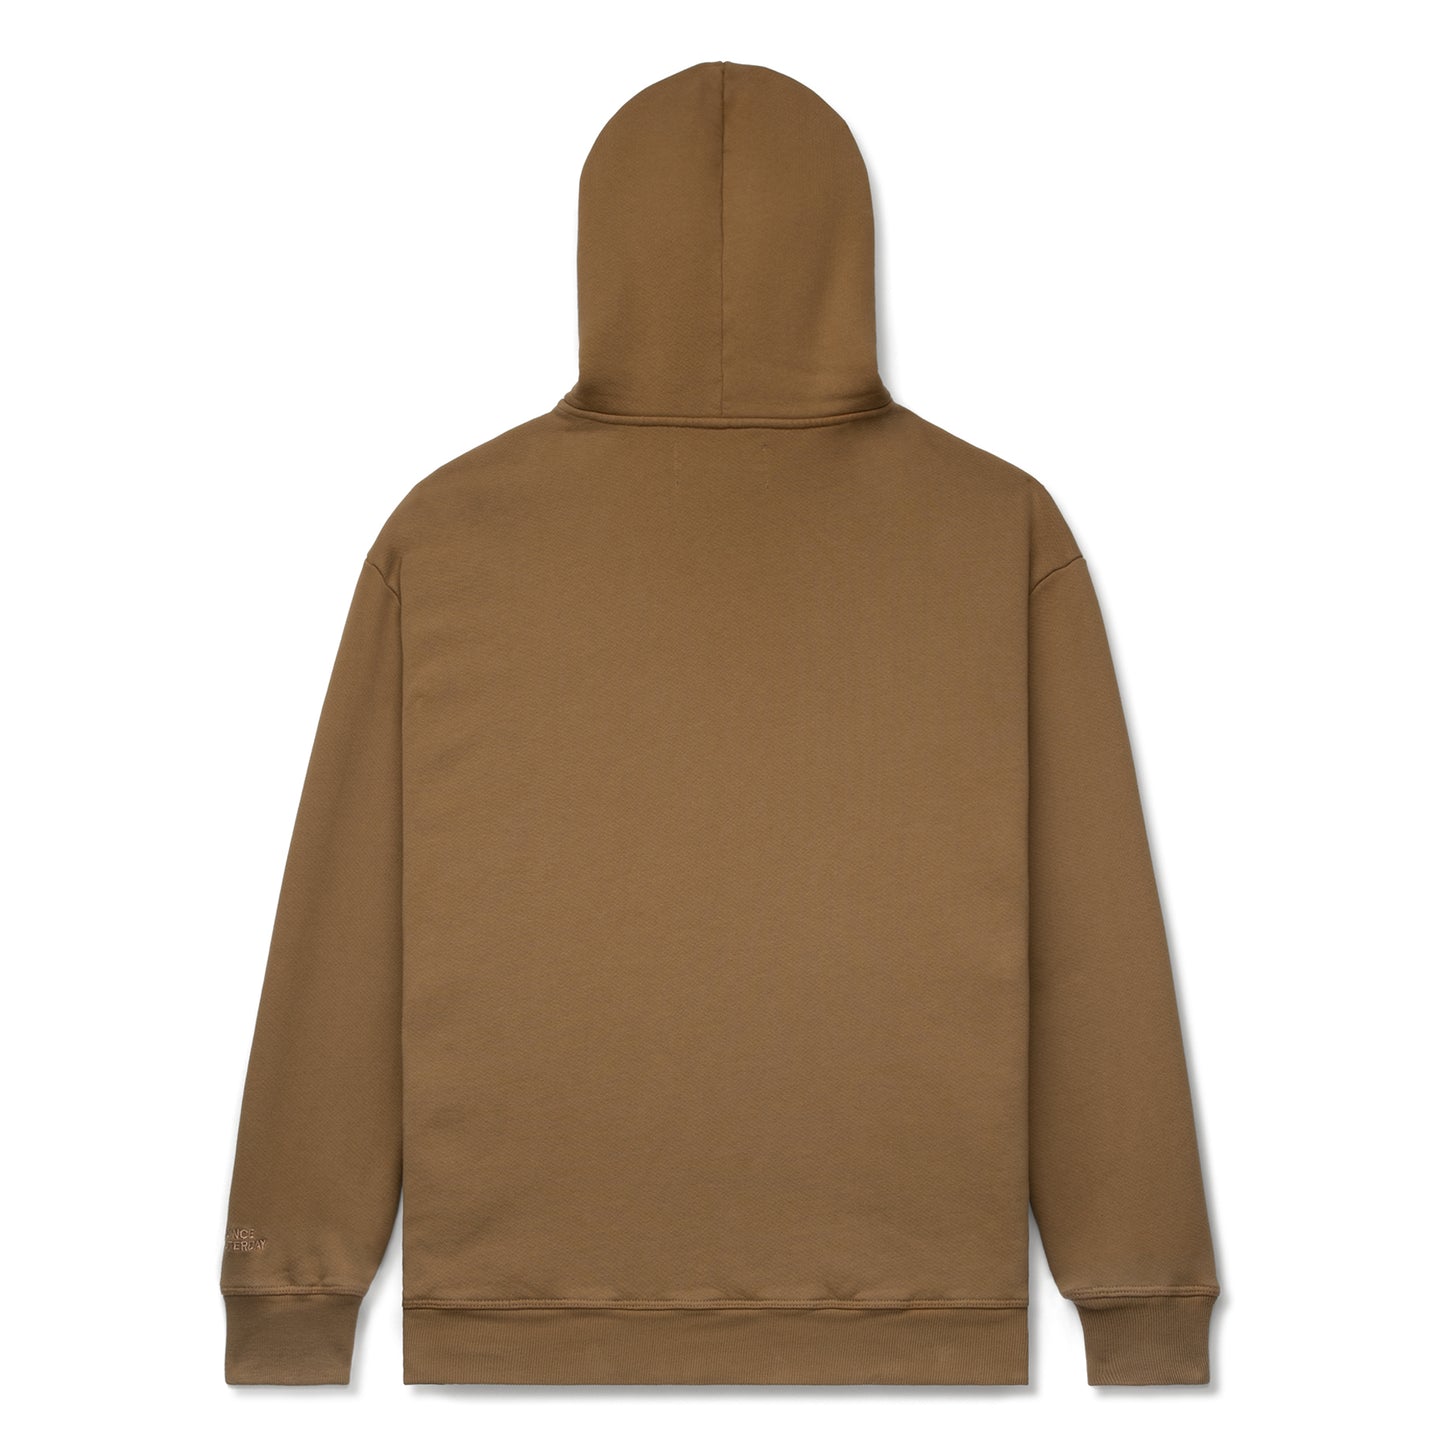 Concepts Now I See It Hoodie (Zealand)